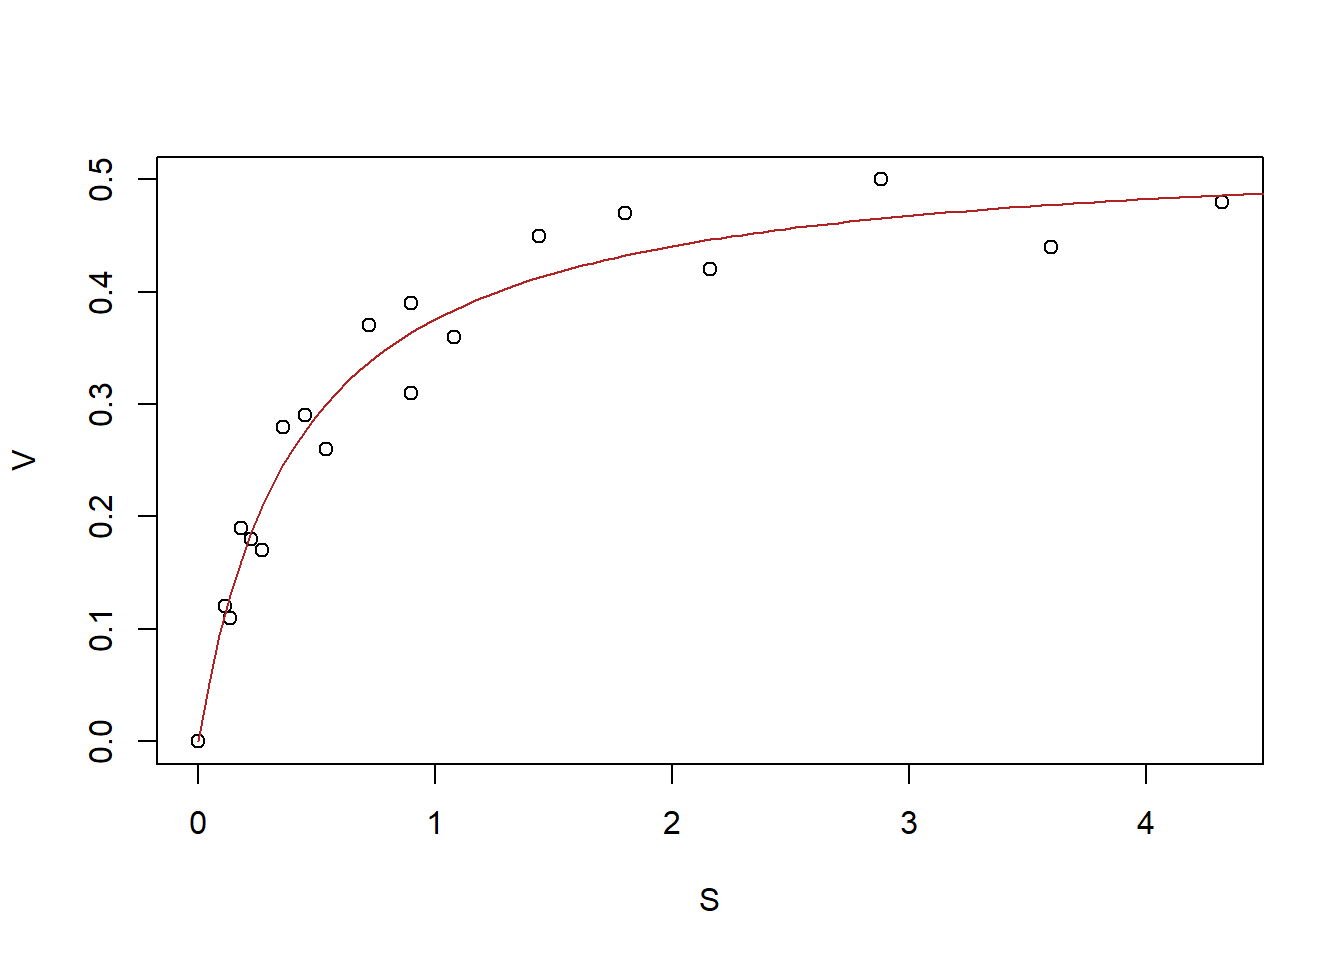 A scatterplot of velocity vs substrate concentration for each observation with a logarithmic trending line superimposed.